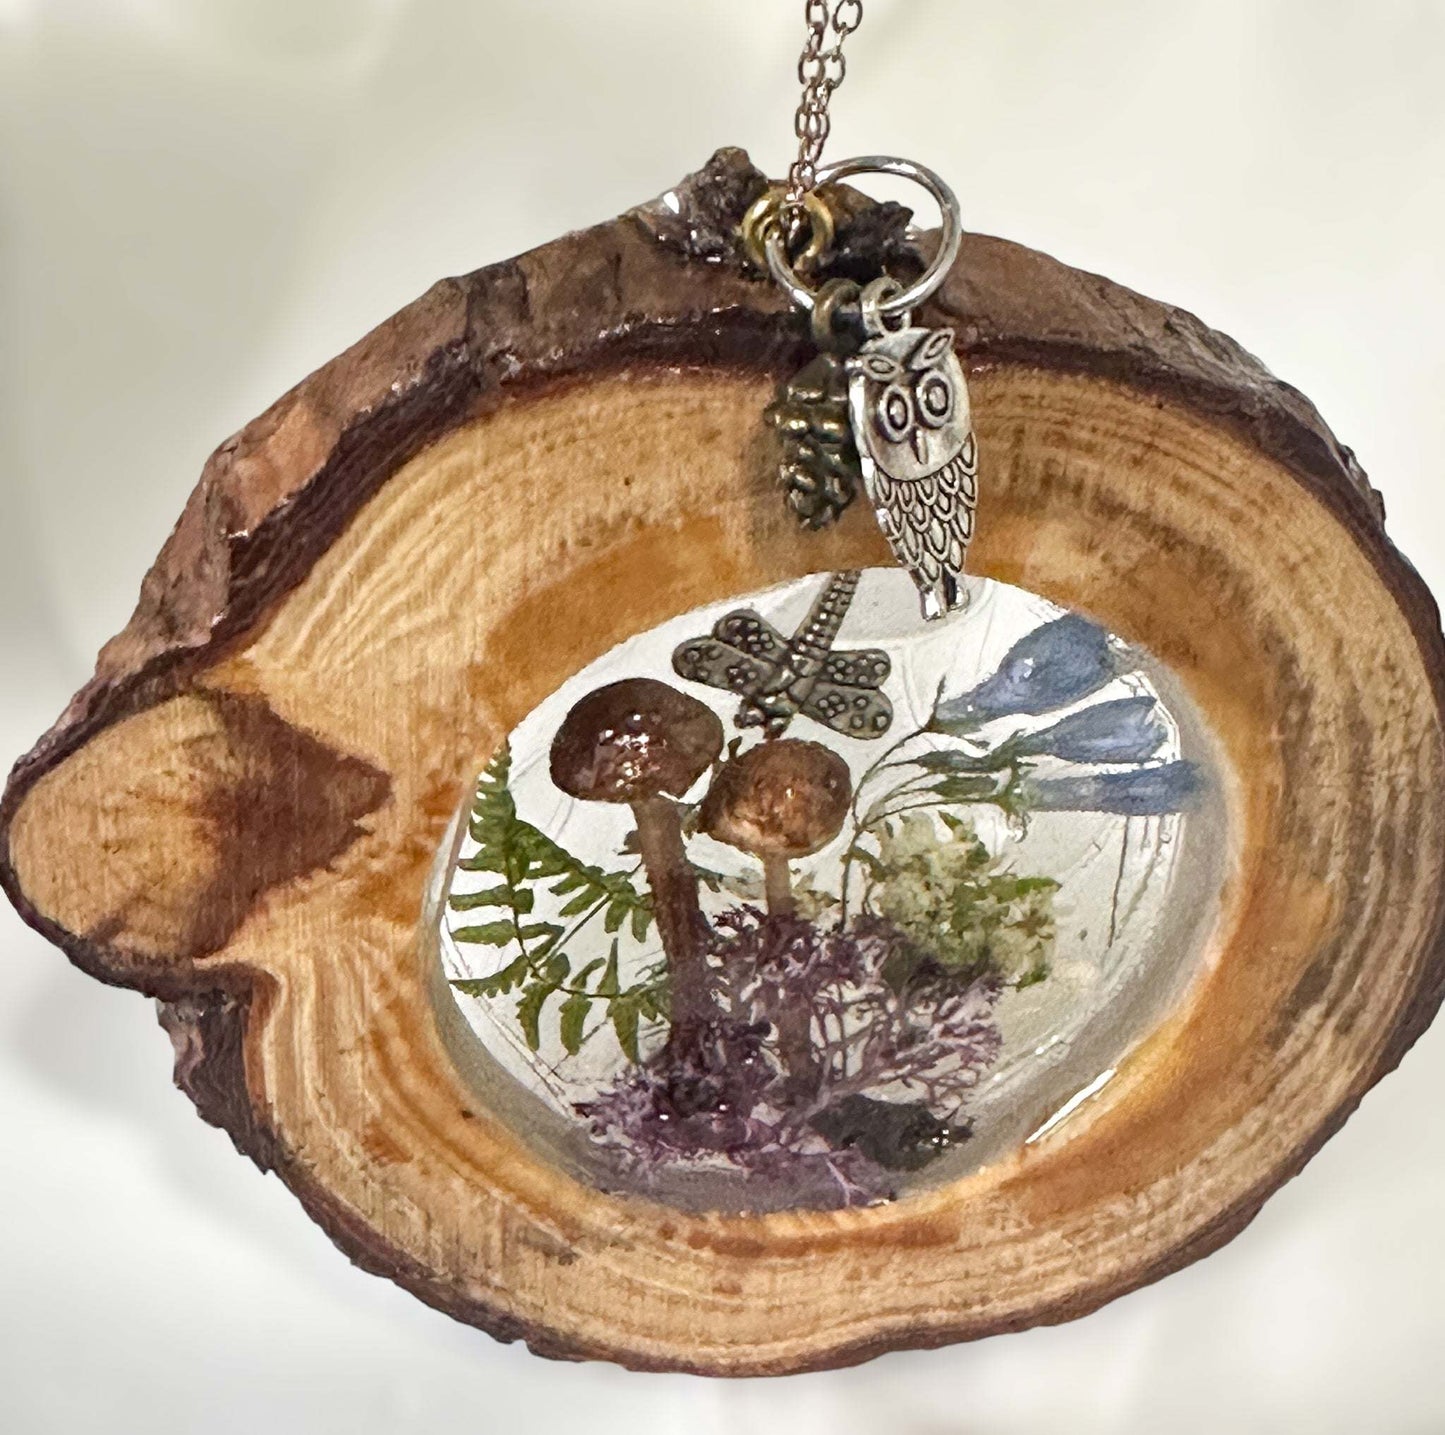 Enchanted Forest Wood Suncatcher - Real Dried Flowers and Mushrooms